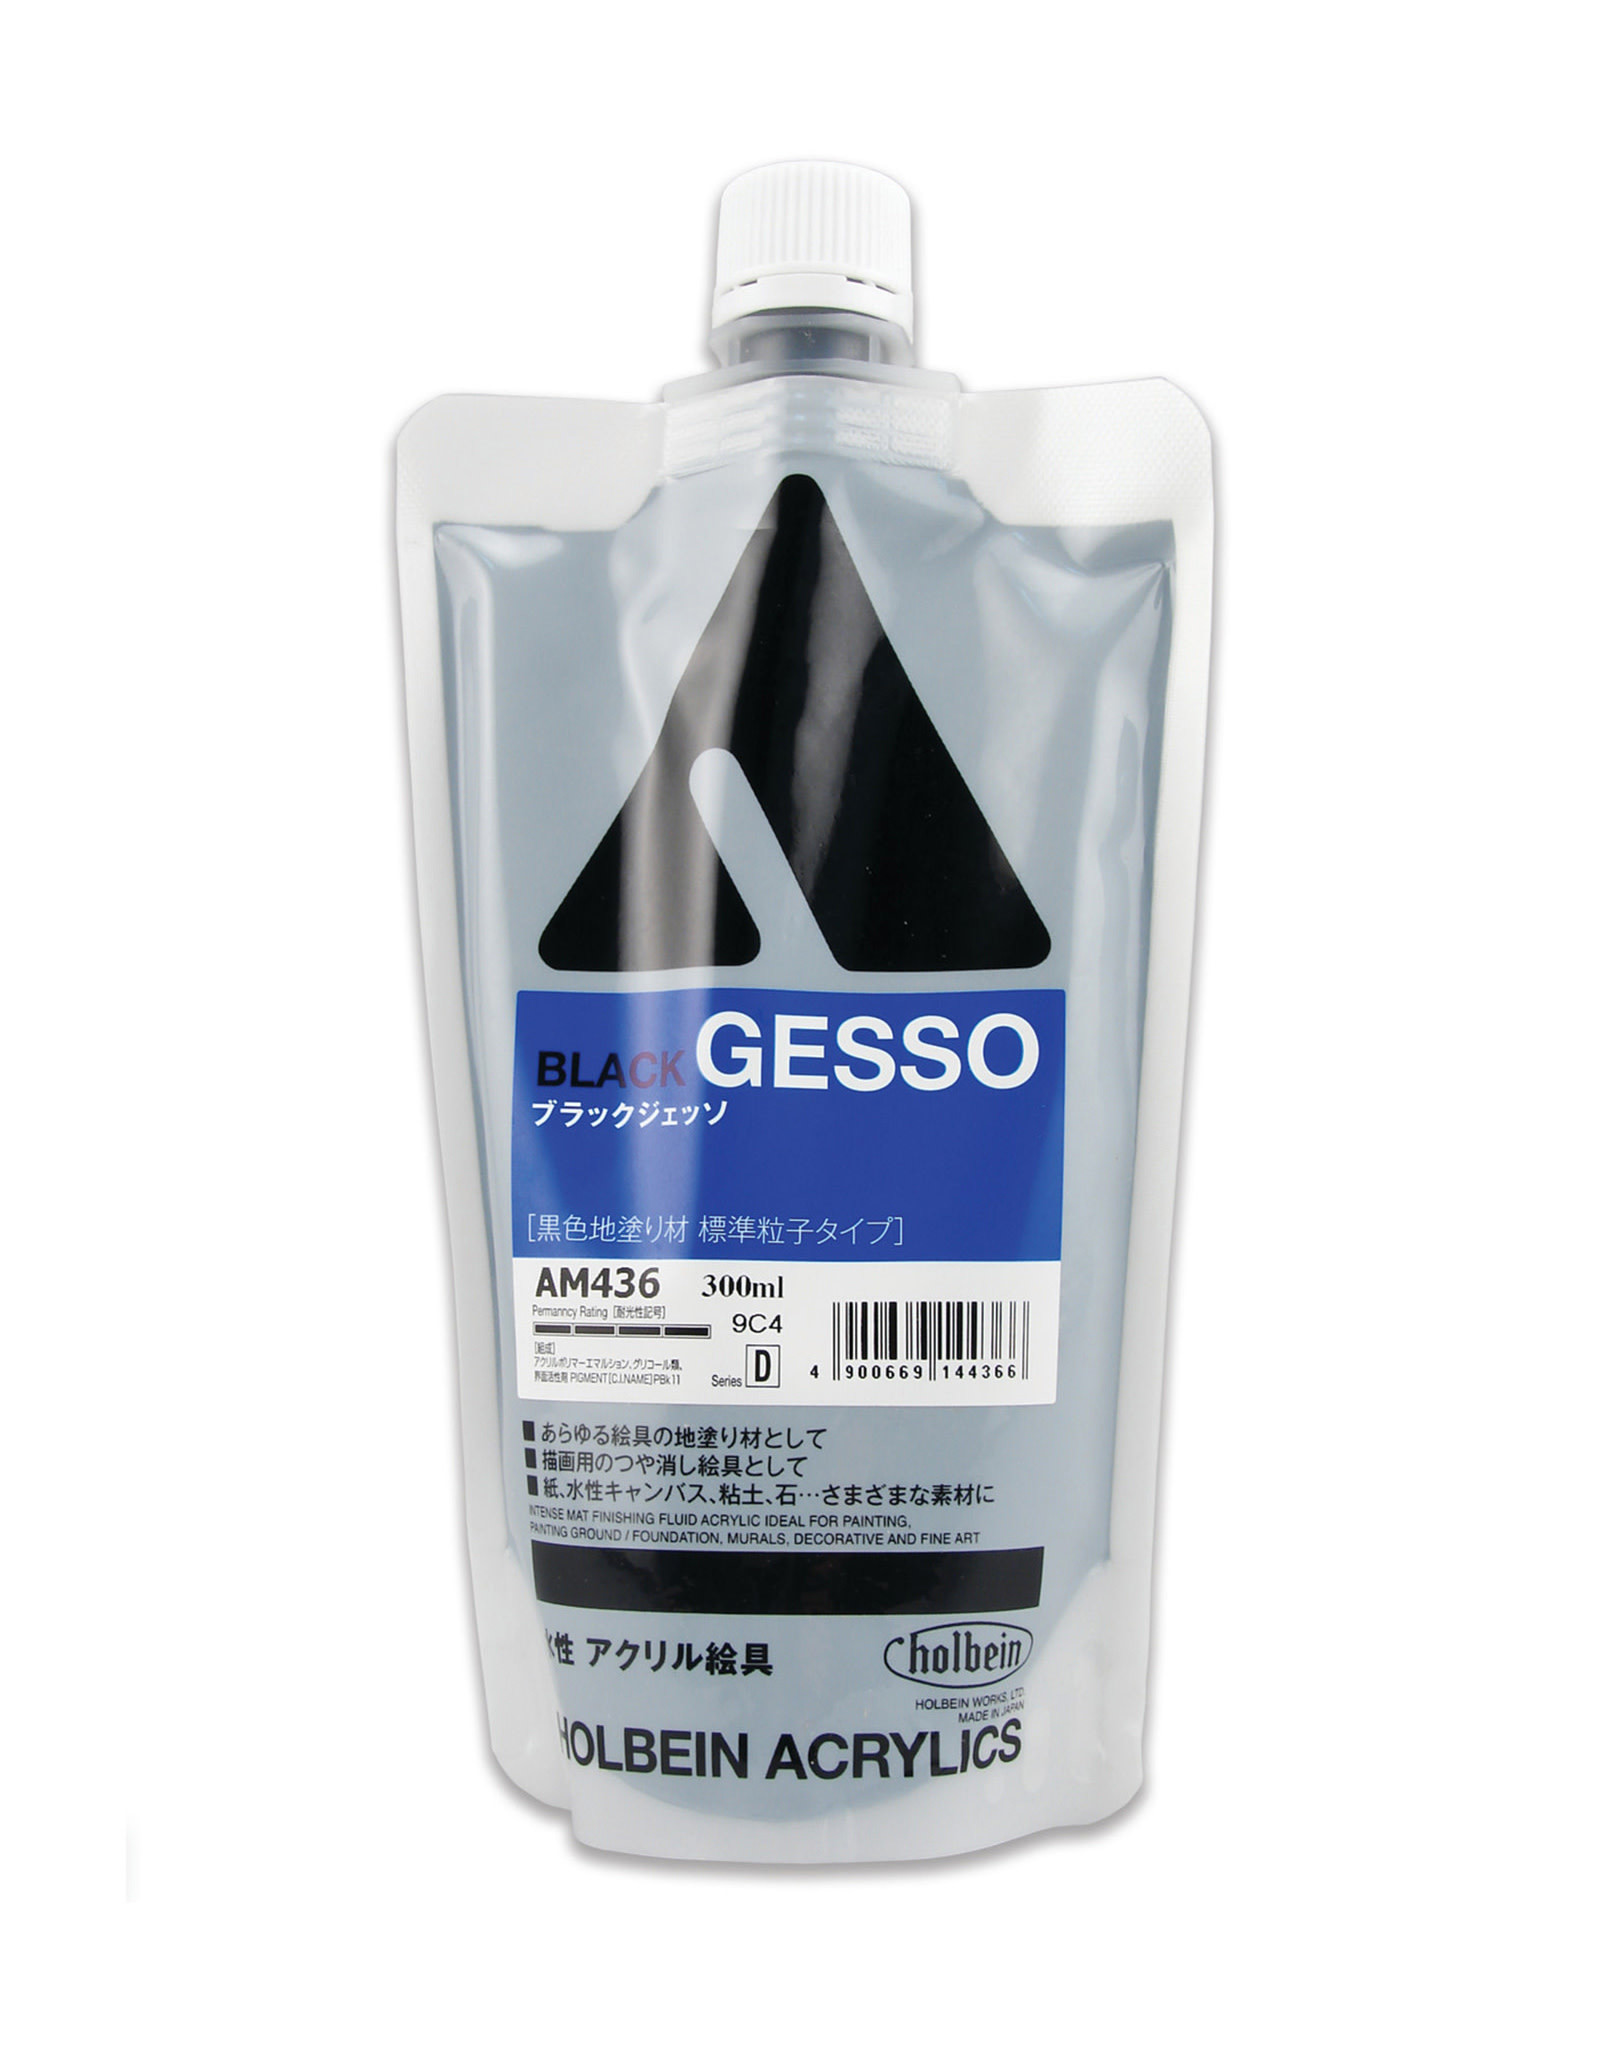 Holbein Gesso Base Black - The Art Store/Commercial Art Supply